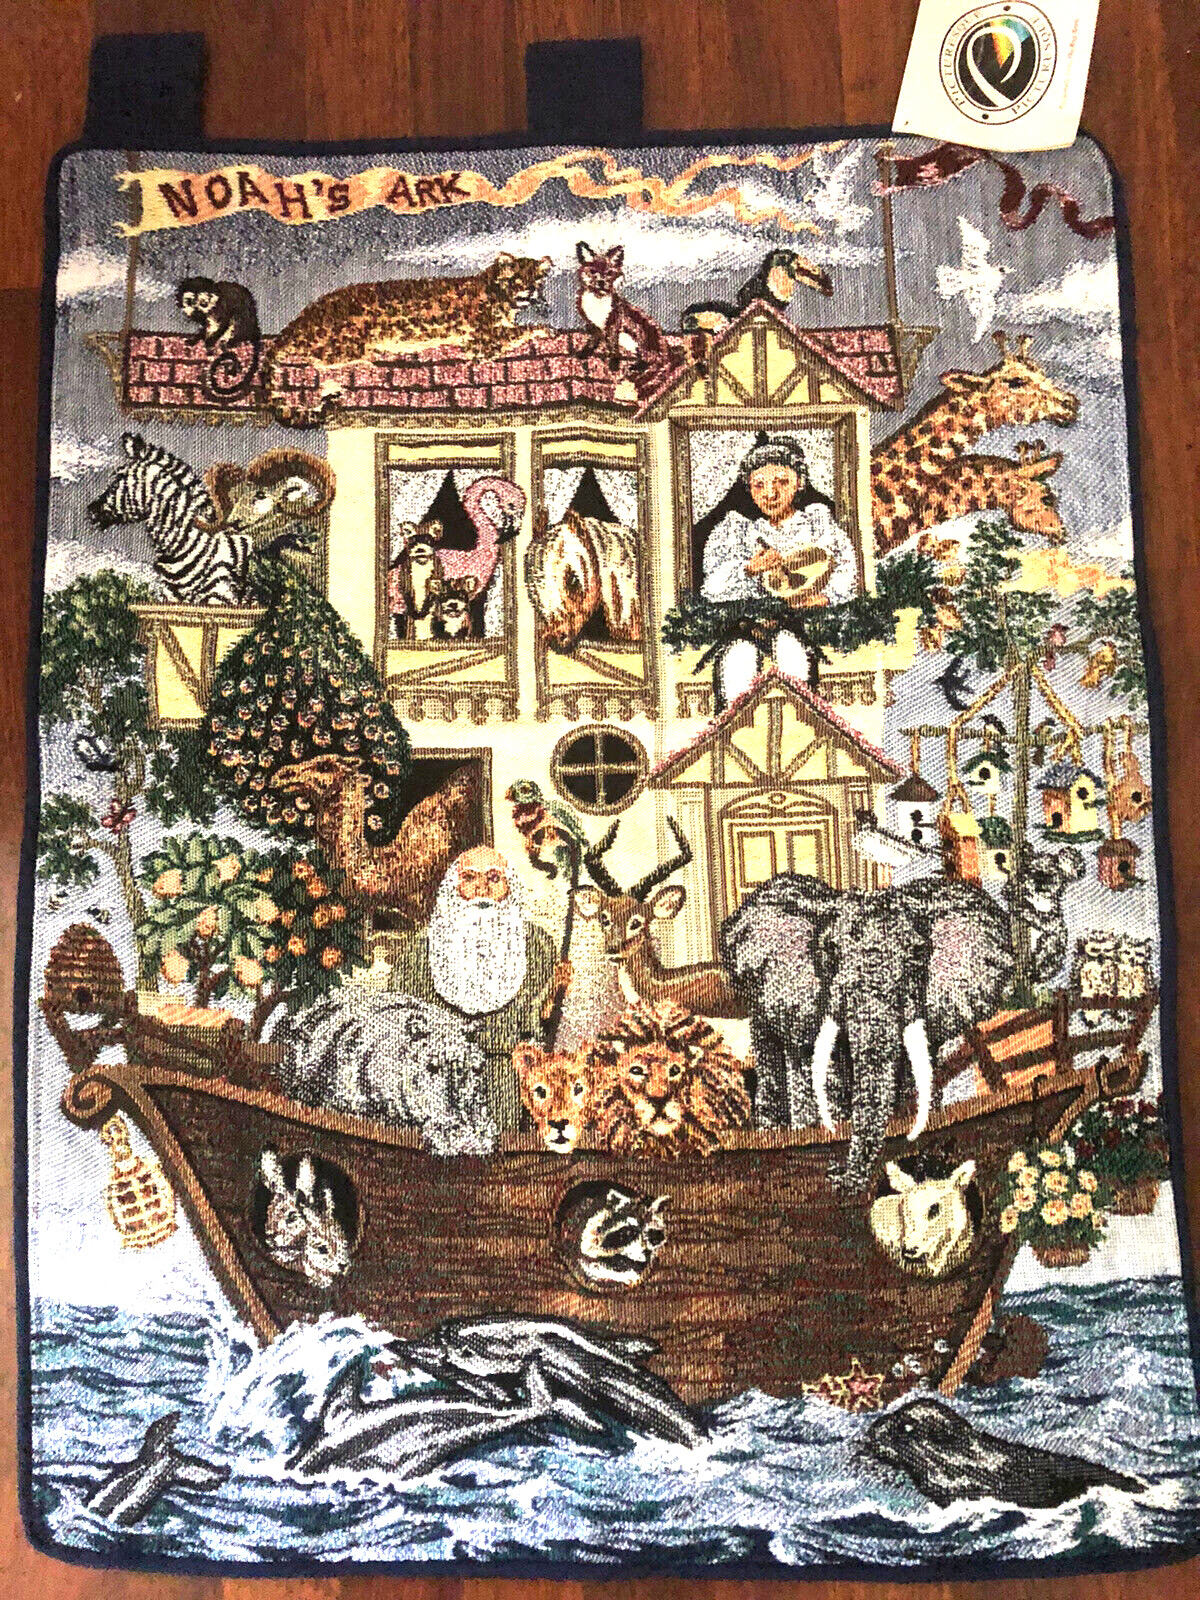 Noah's Voyage Cotton Wall Tapestry Noah's Ark 34x 24 inch with Tags